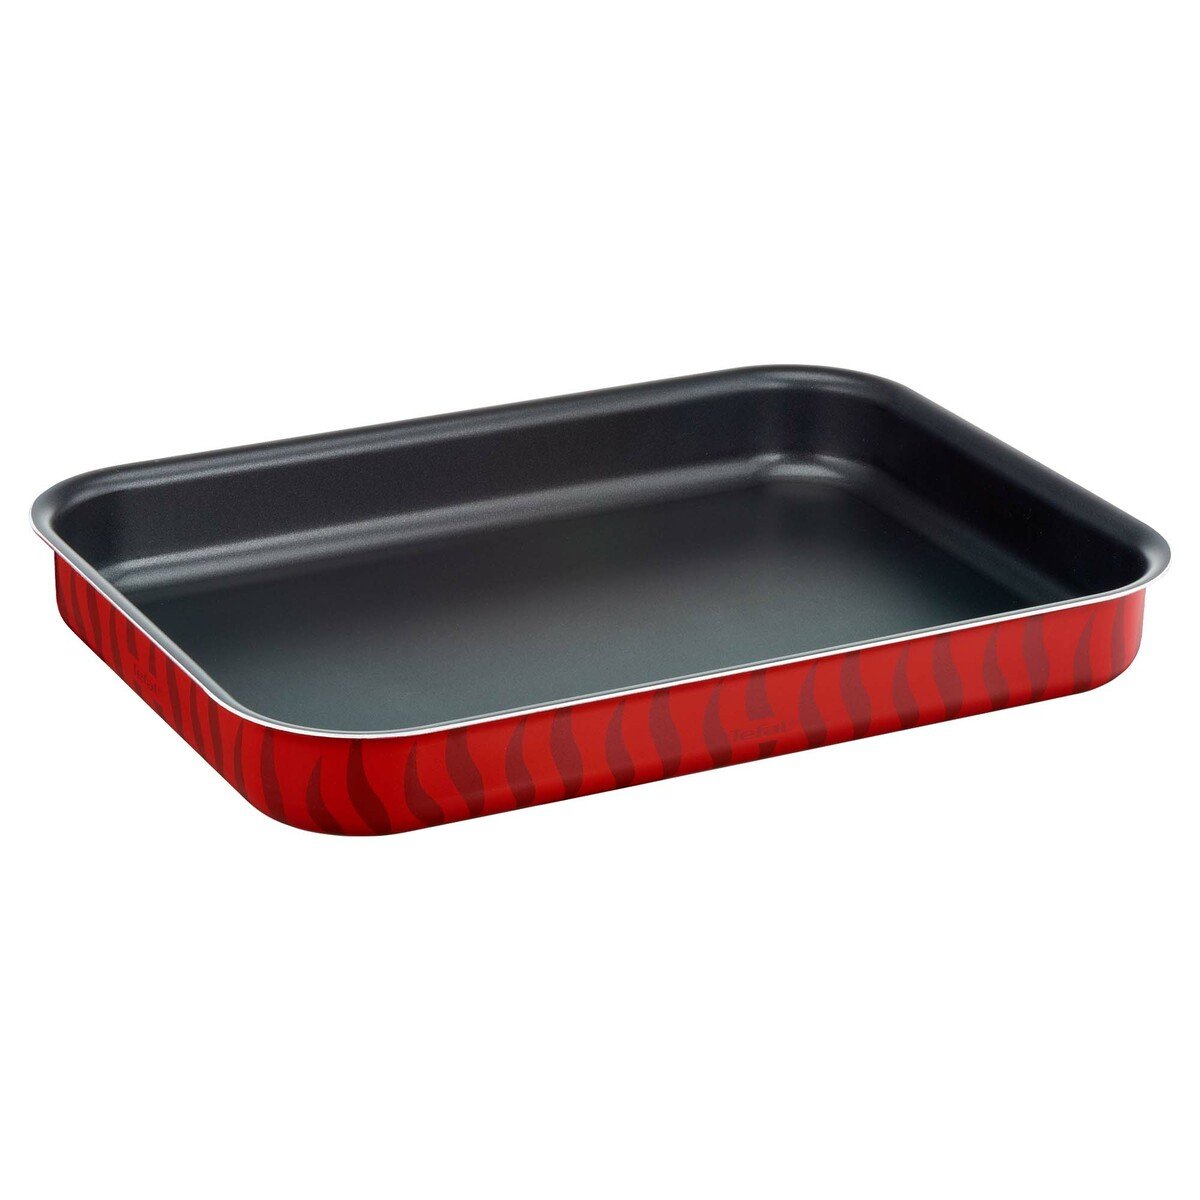 Tefal Les Specialistes Oven Dish Roaster Rectangle 31X24cm